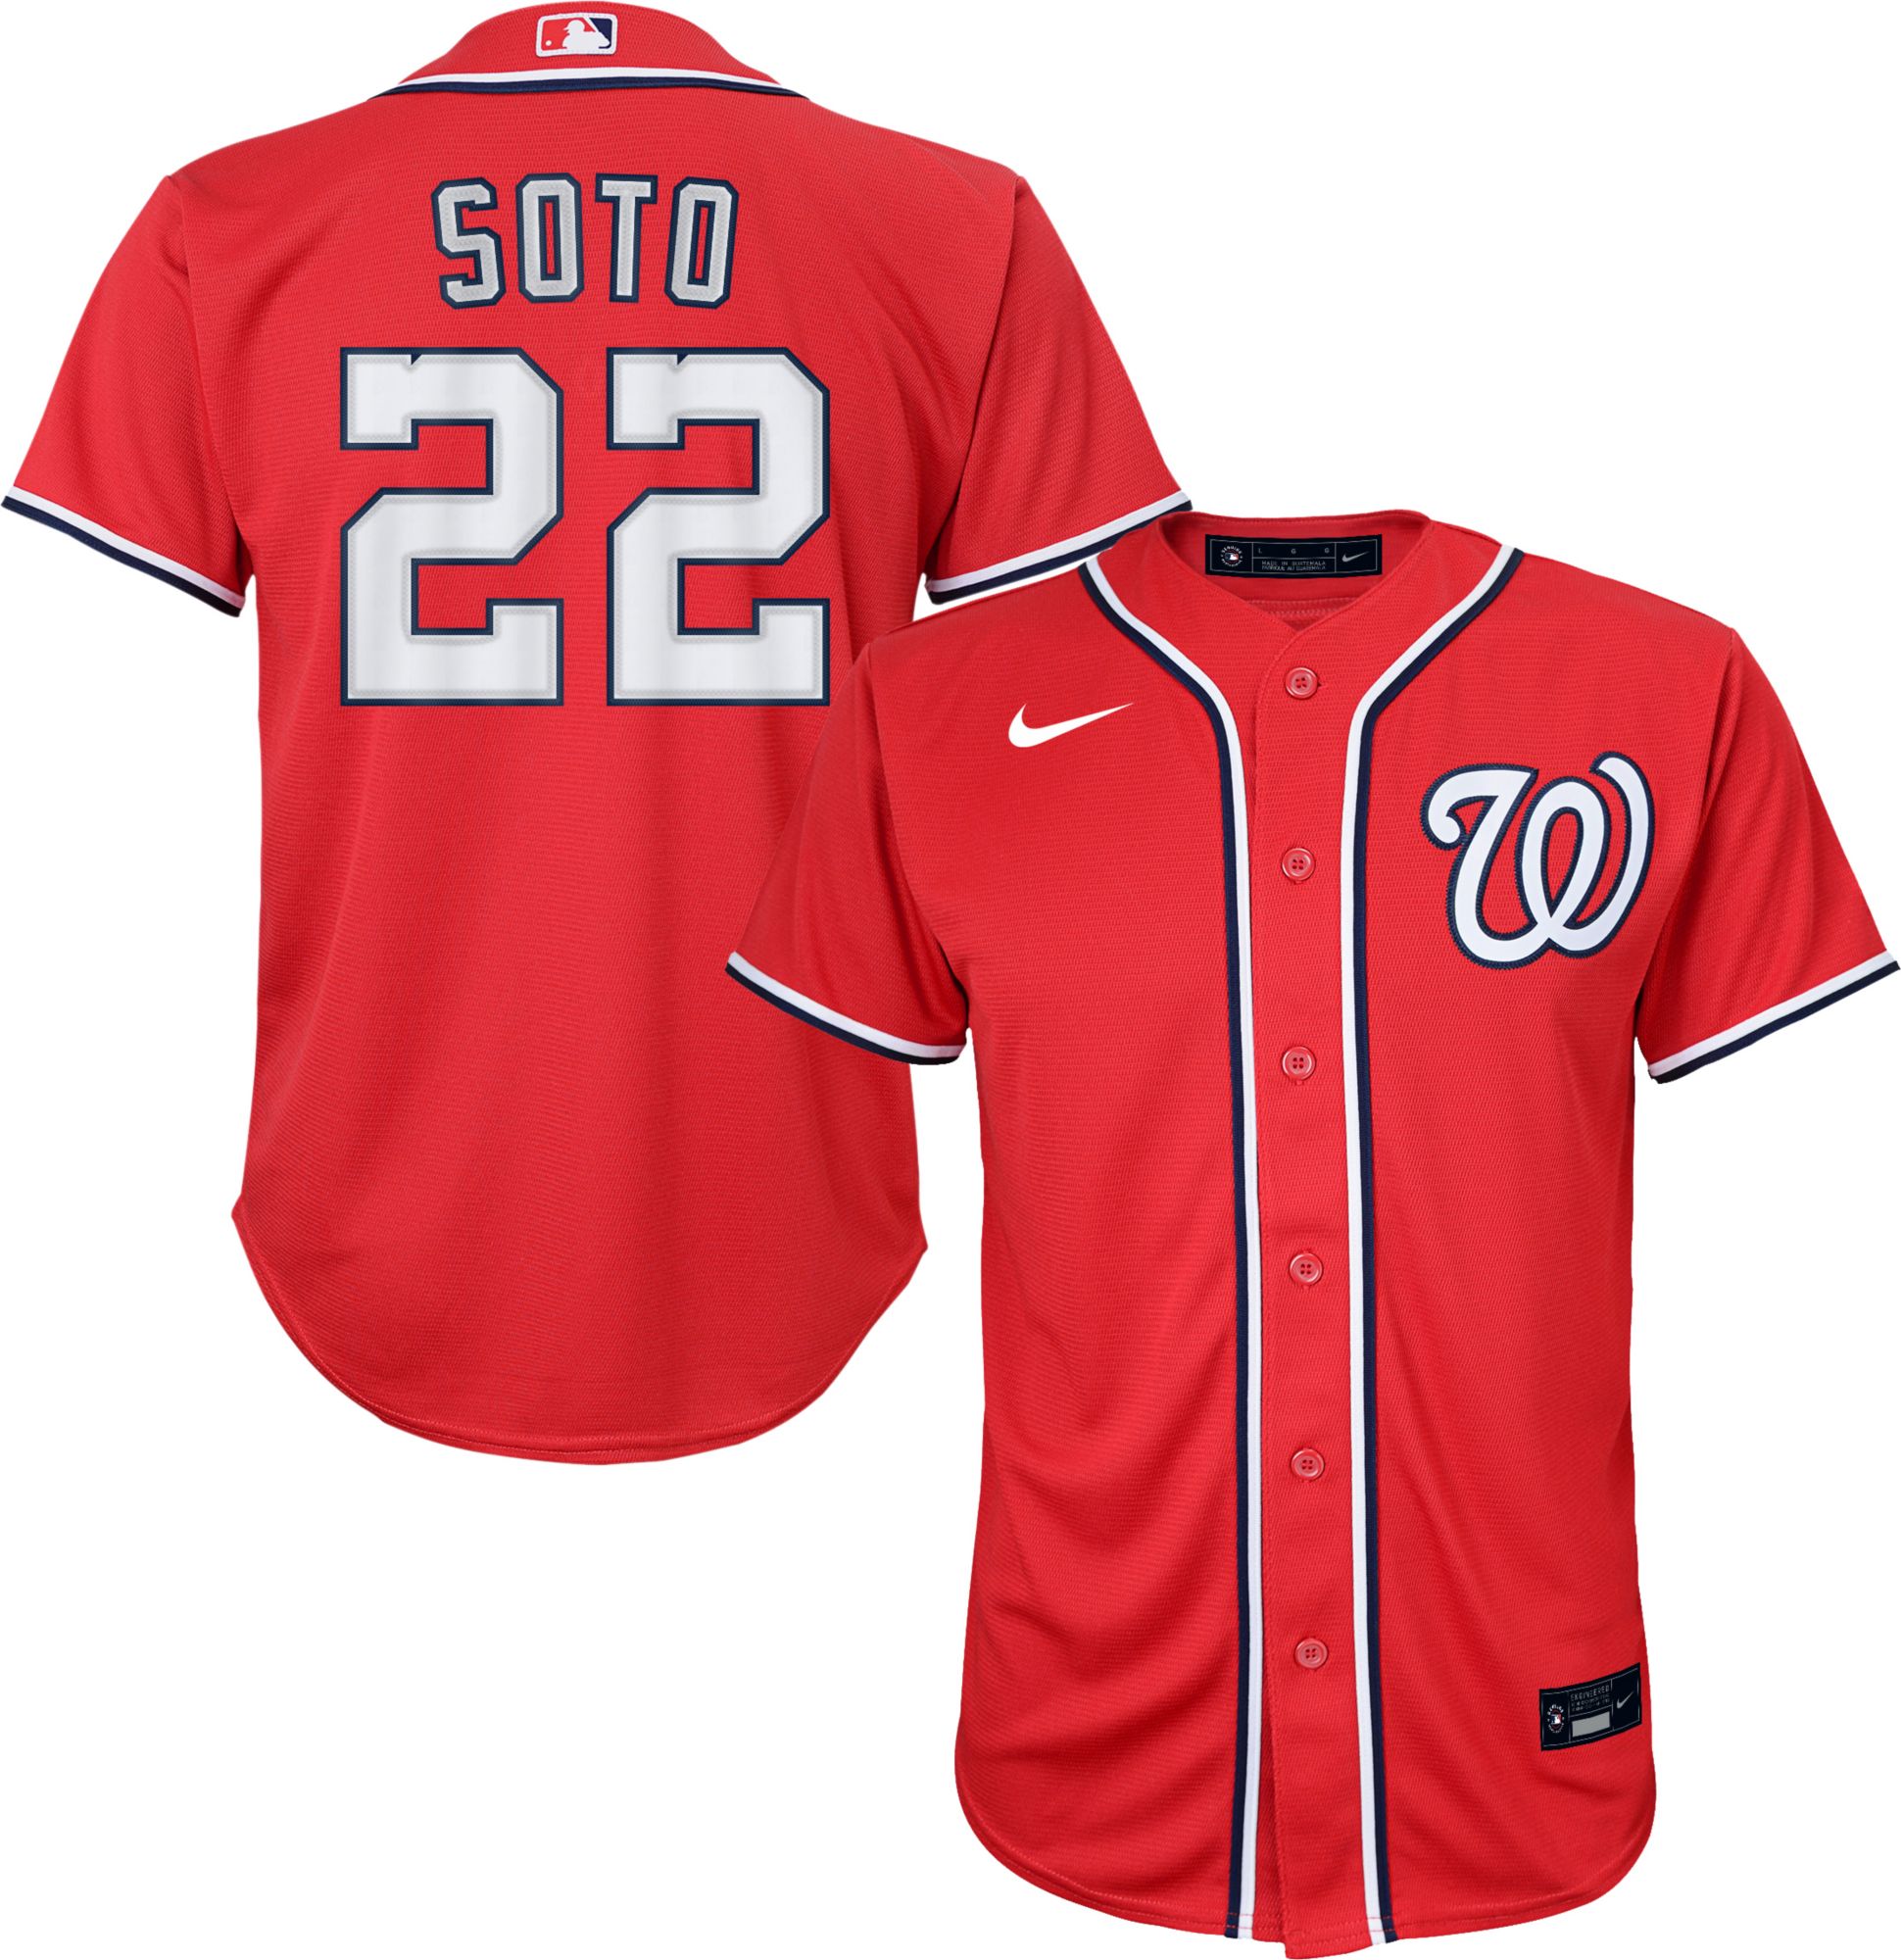 nationals red white and blue jersey